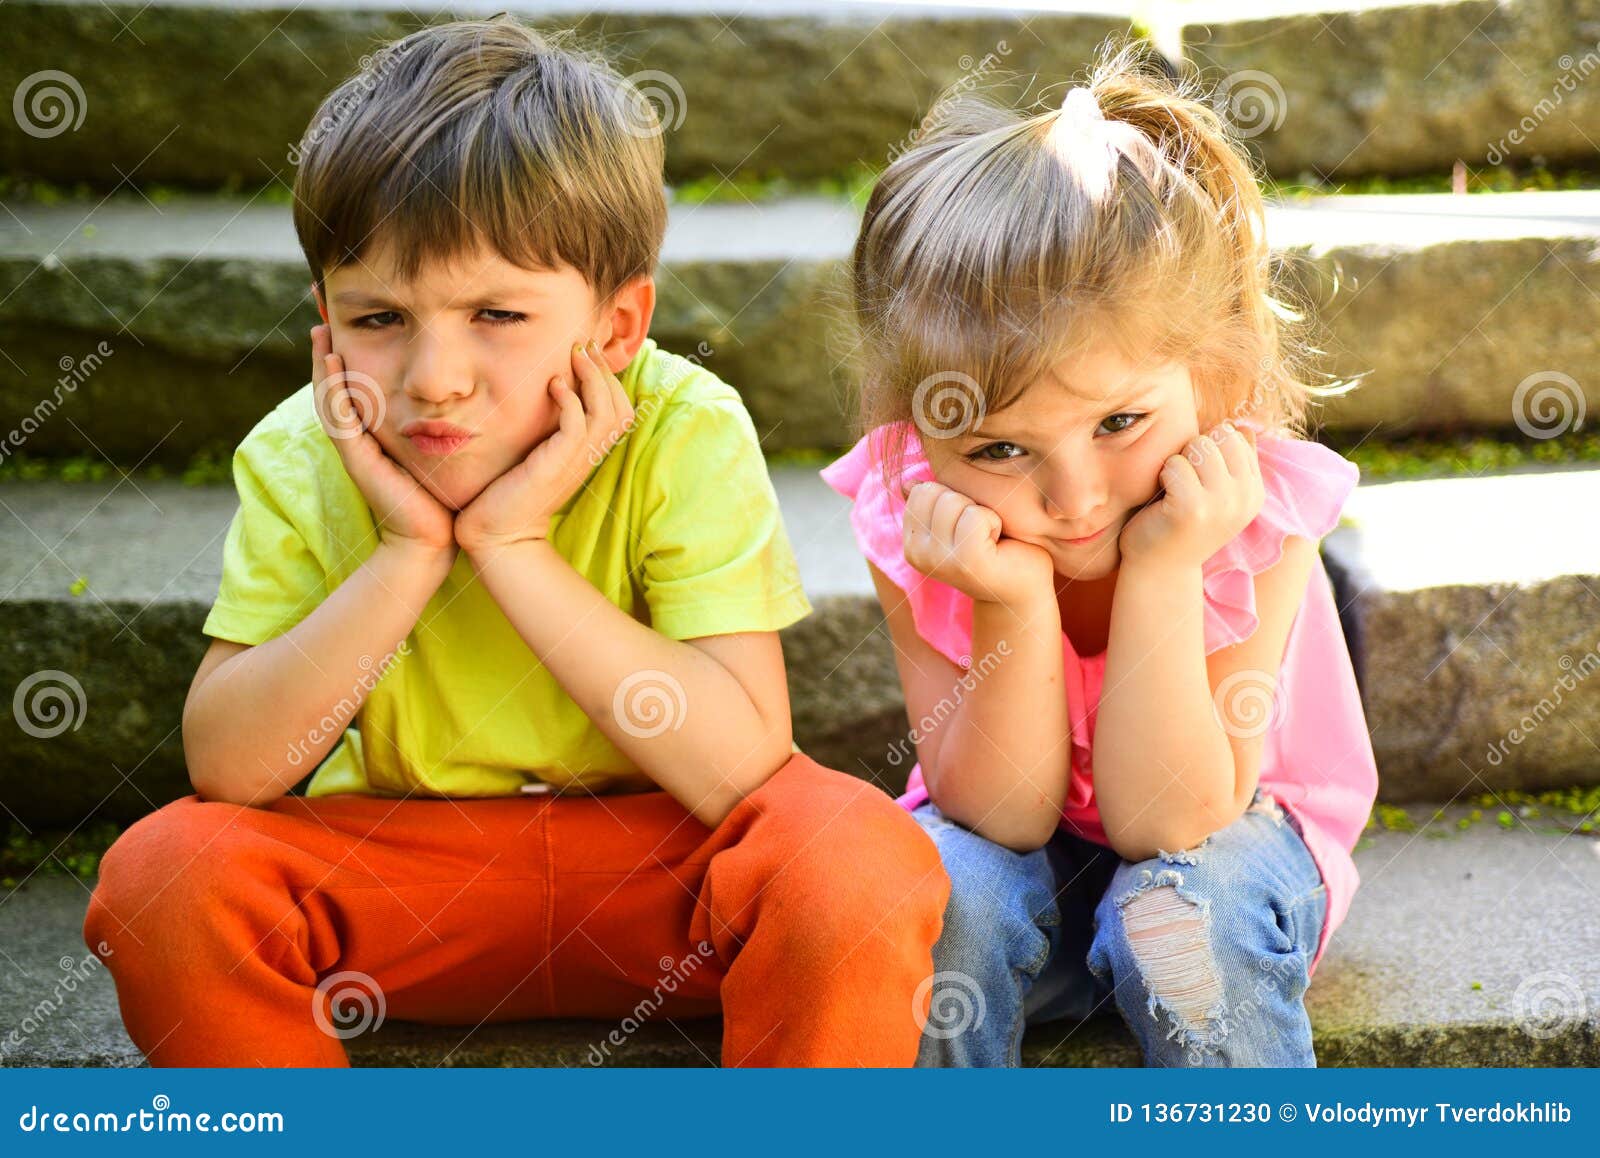 1 138 Little Boy Girl Best Friends Photos Free Royalty Free Stock Photos From Dreamstime